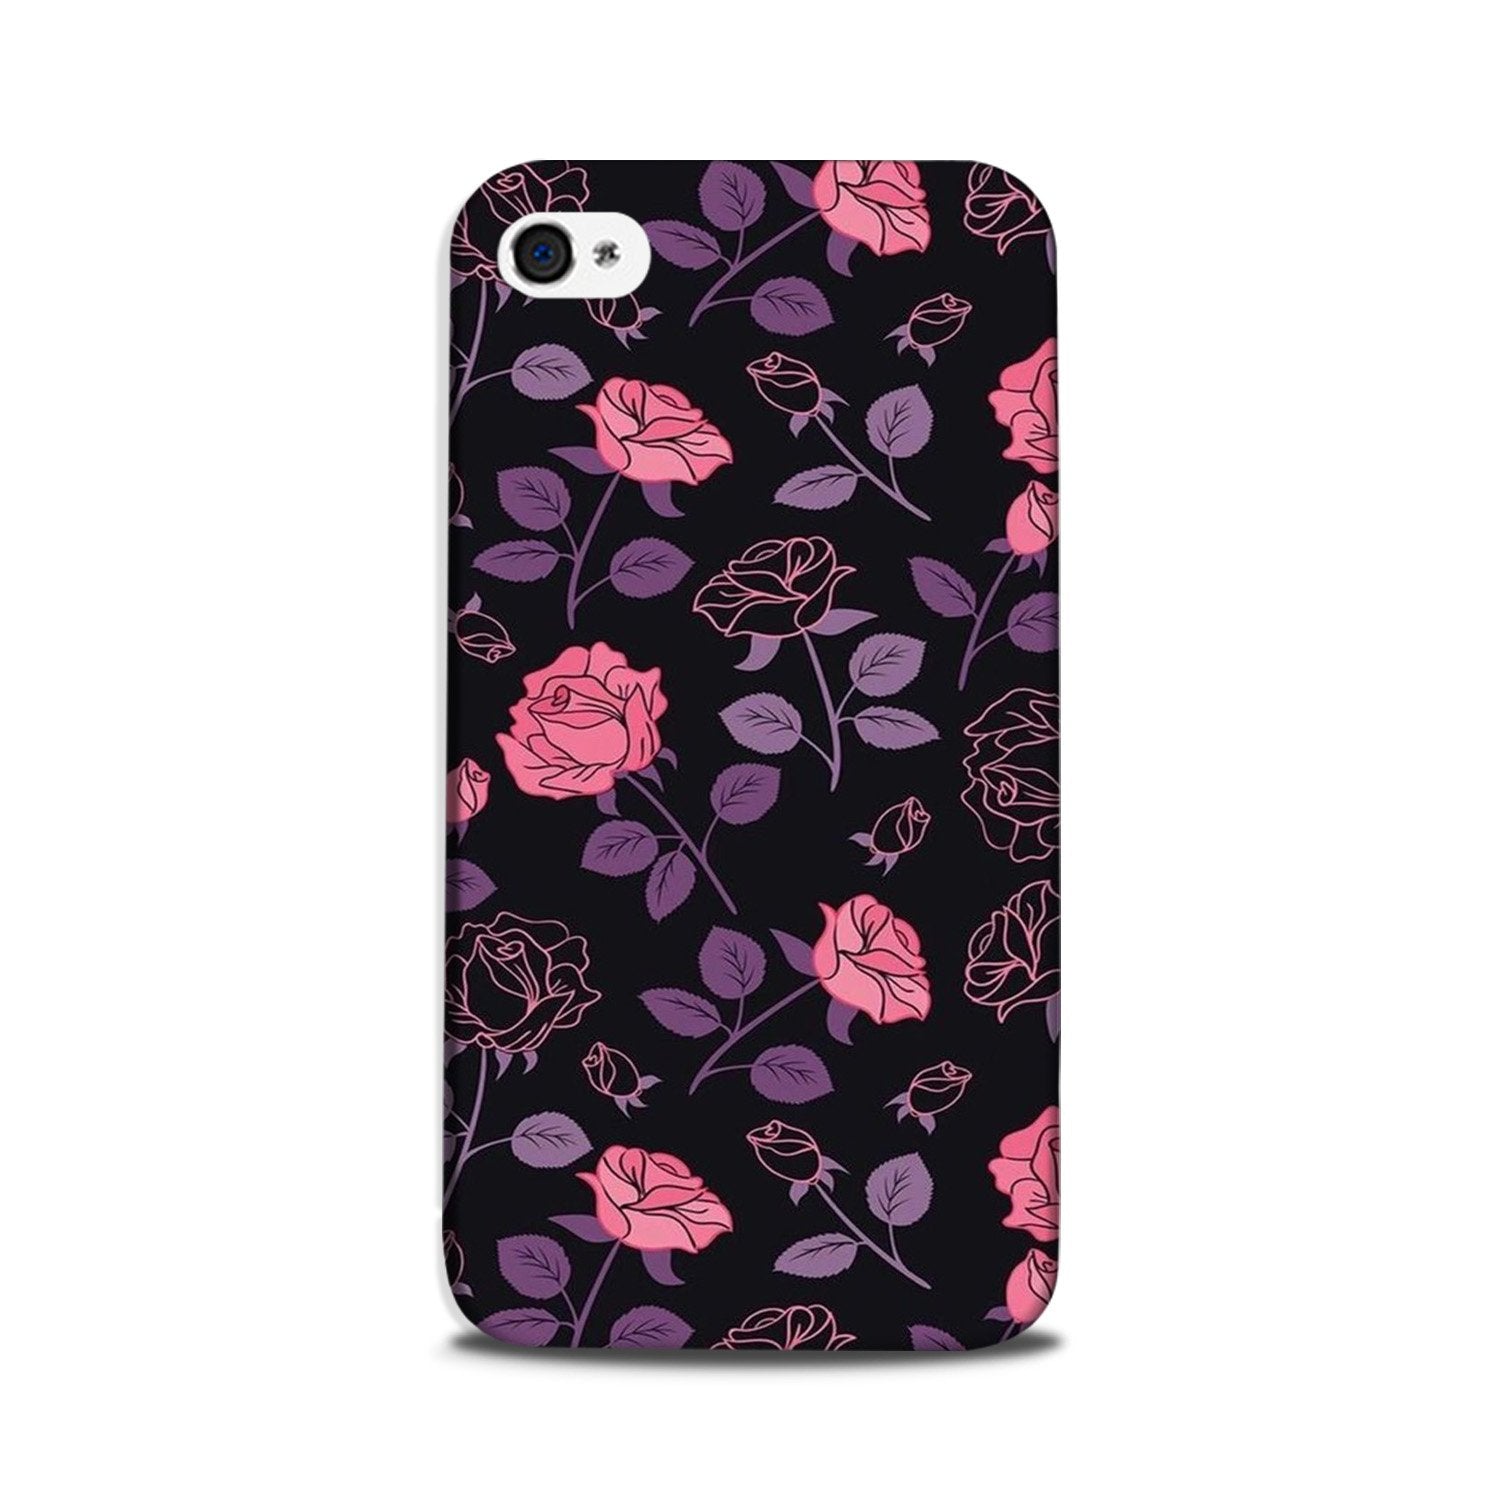 Rose Pattern Case for iPhone 5/ 5s